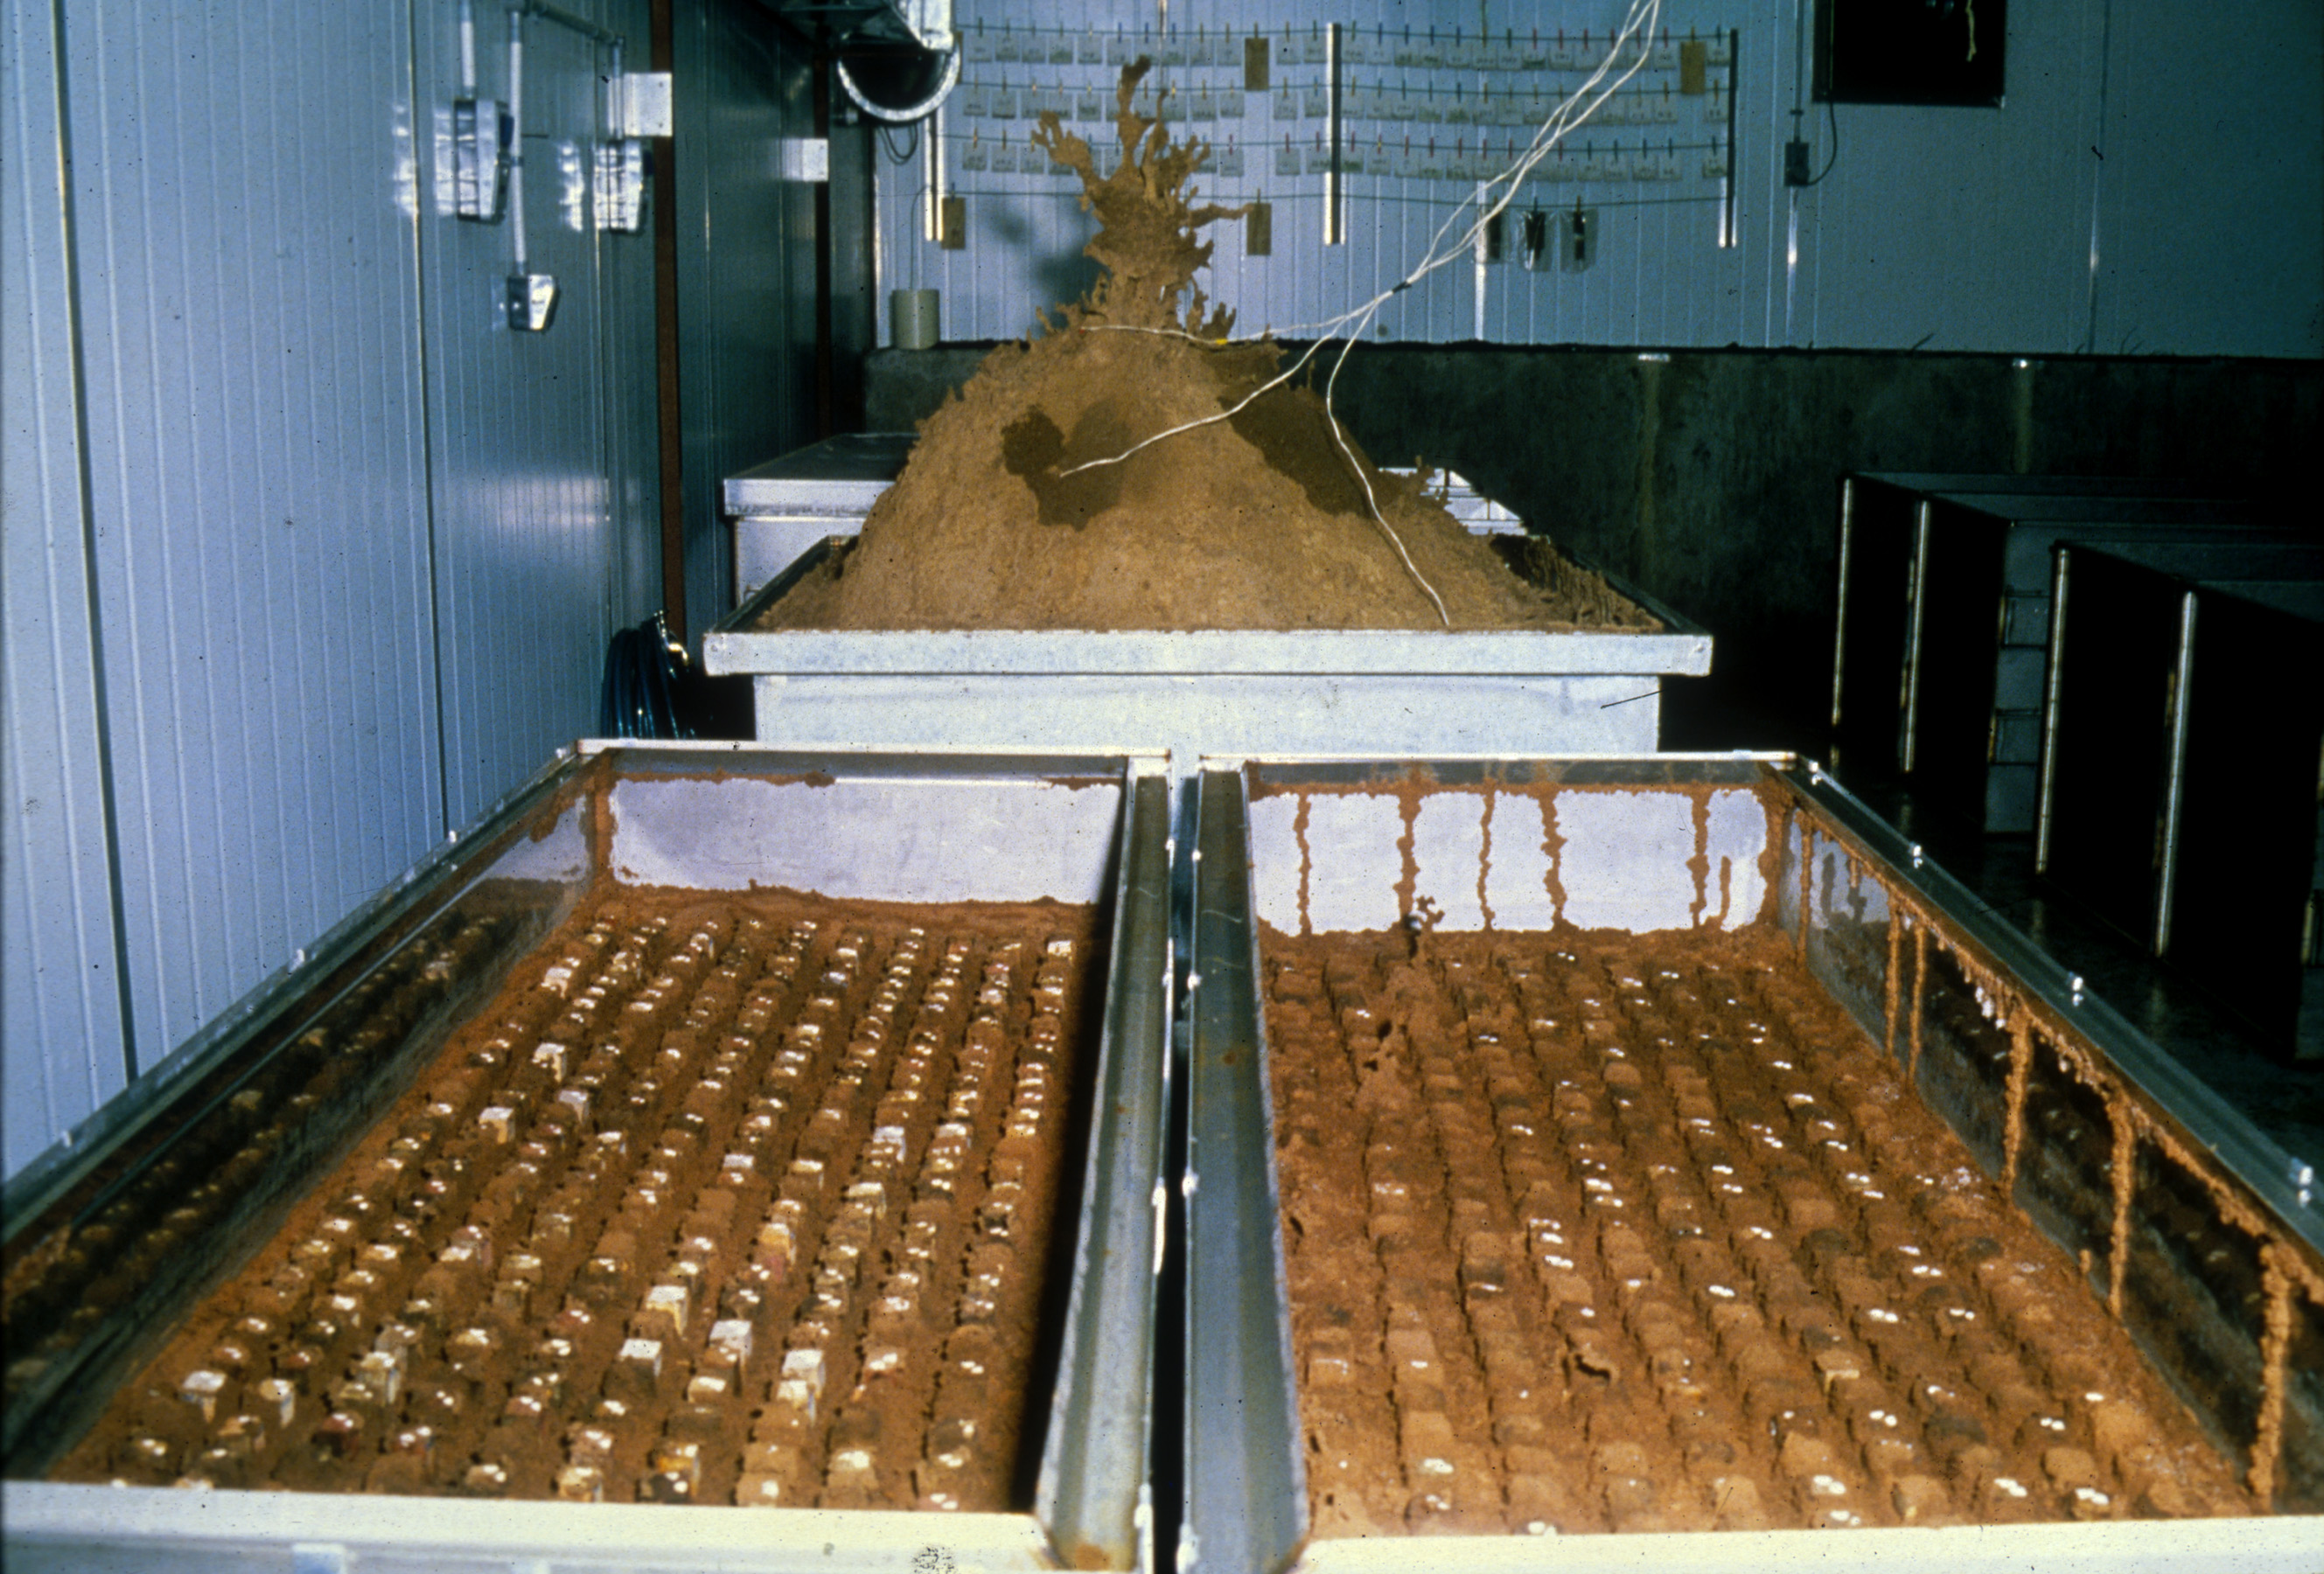 Termite research at The Commonwealth Scientific and Industrial Research Organisation (CSIRO) Date and Photographer unknown